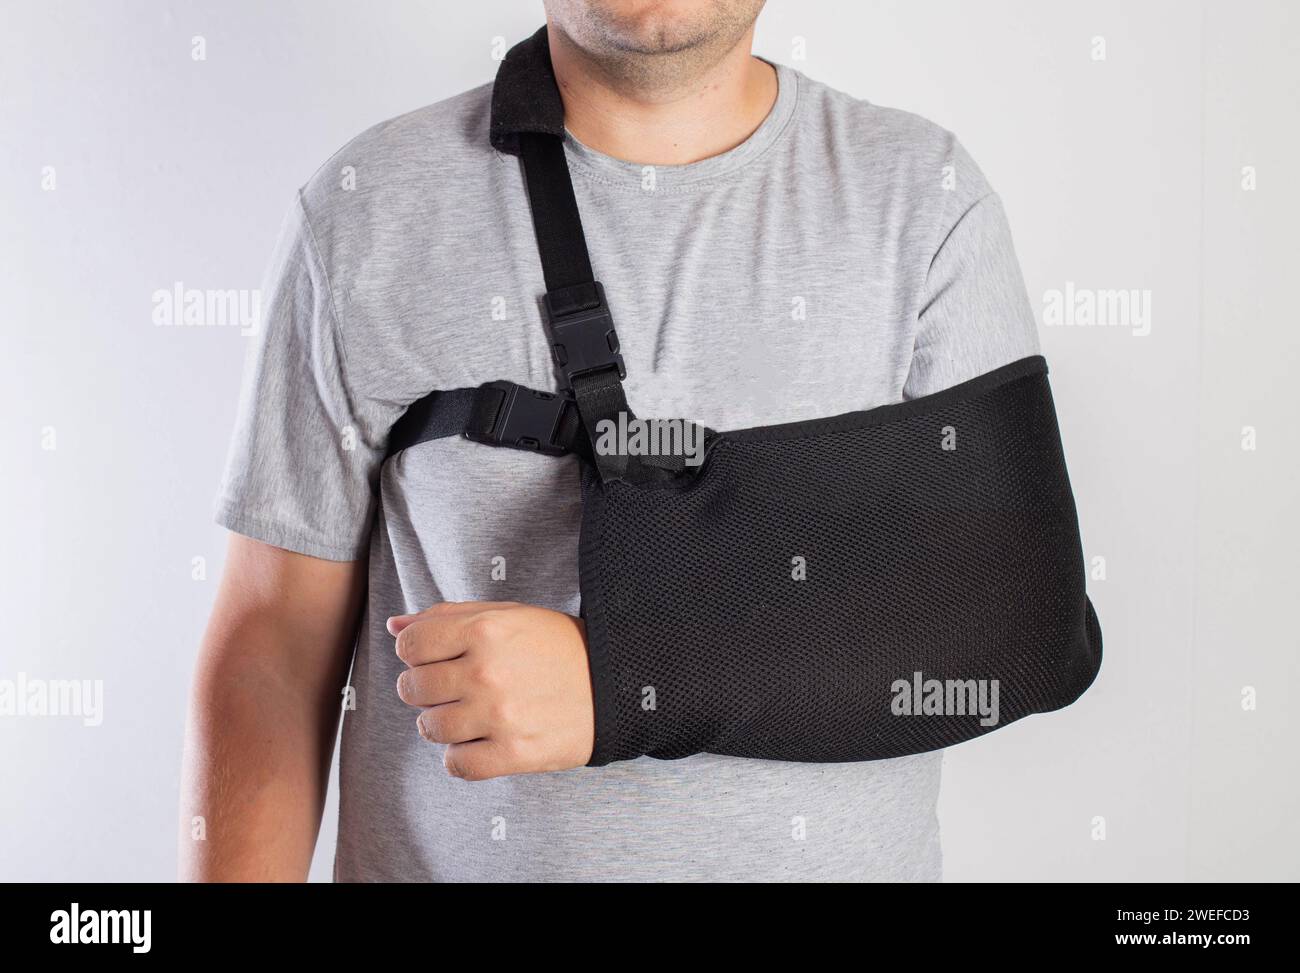 A man on a white background in a bandage to support his arm. Immobilization of the hand and forearm after injury. Rehabilitation after a broken bone. Stock Photo